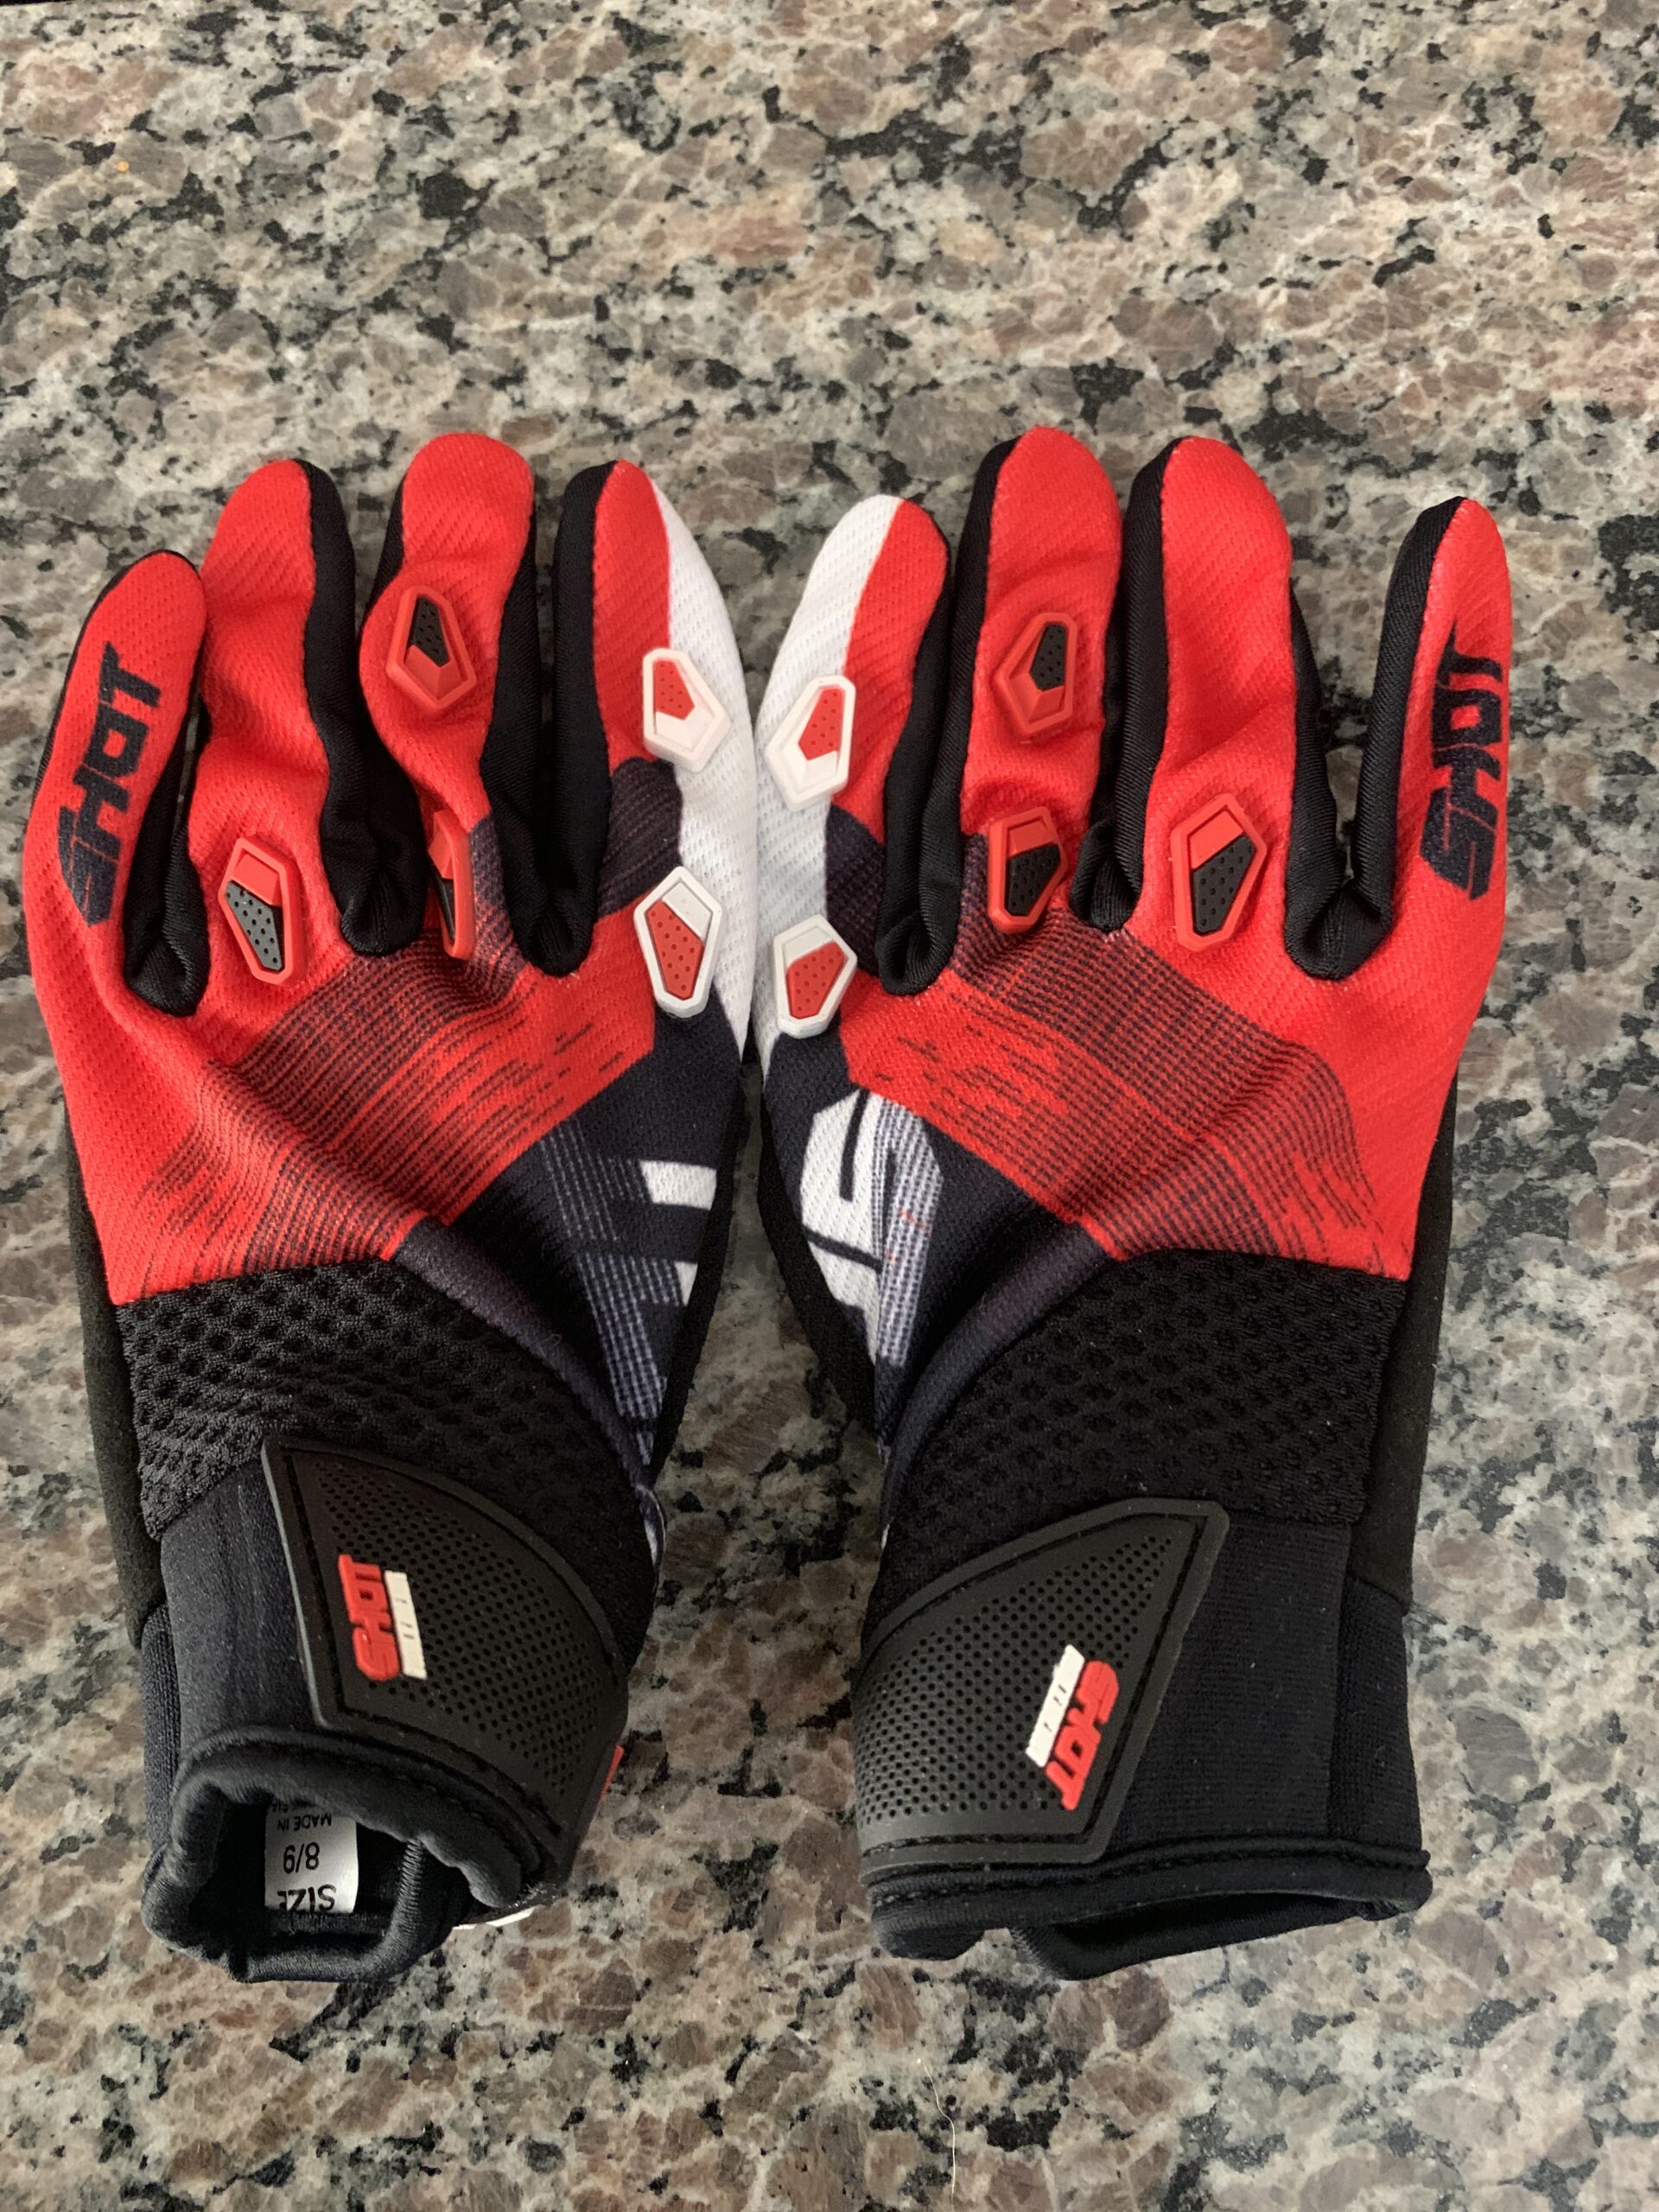 Shot Race Gear Youth Gloves Size 8/9 Red Black